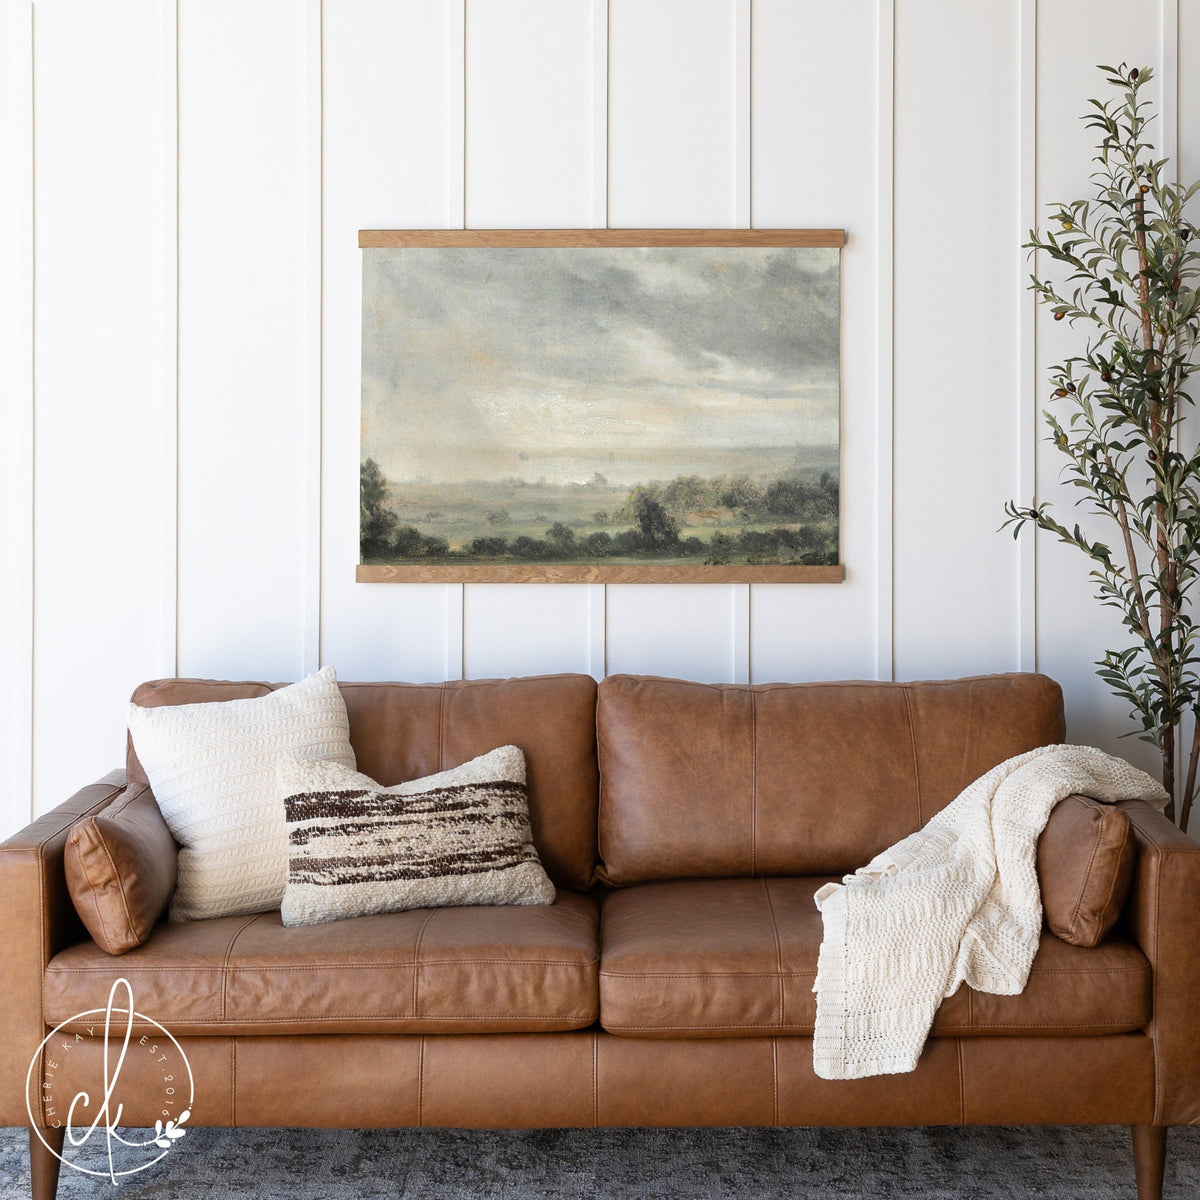 Landscape Art | Vintage Wall Decor | Canvas Tapestry Wall Art | Fabric Wall Hanging | Living Room Wall Decor